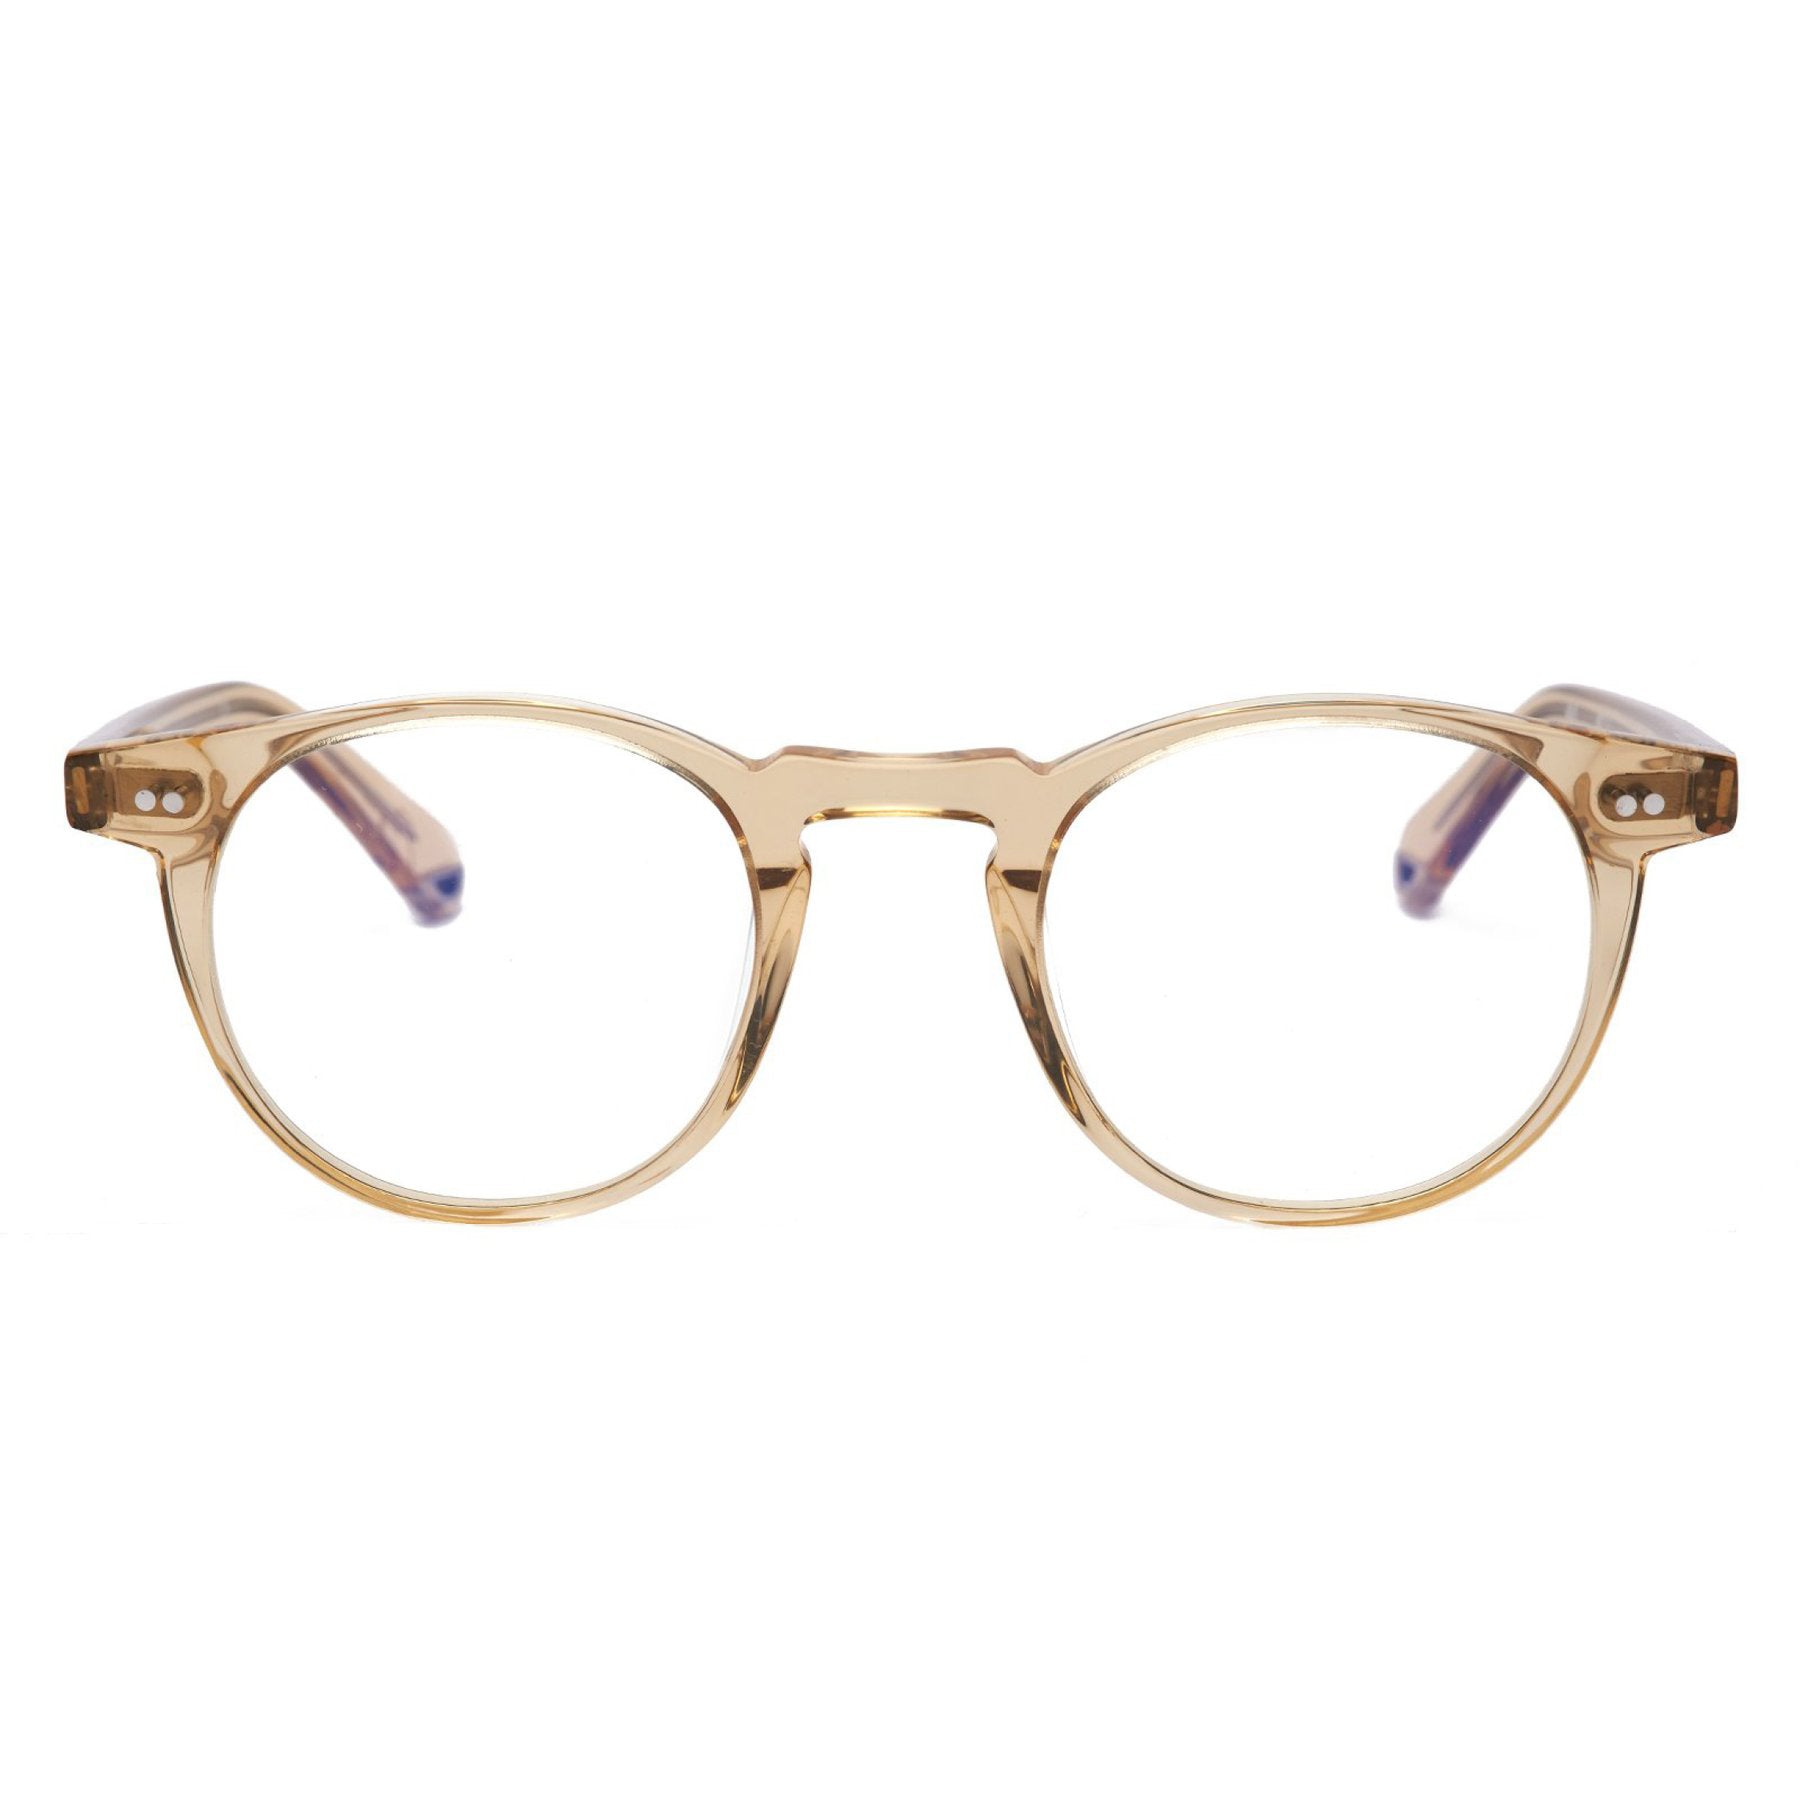 PACIFICO OPTICAL BUCKLER - CHAMPAGNE WITH BLUE LIGHT LENSES